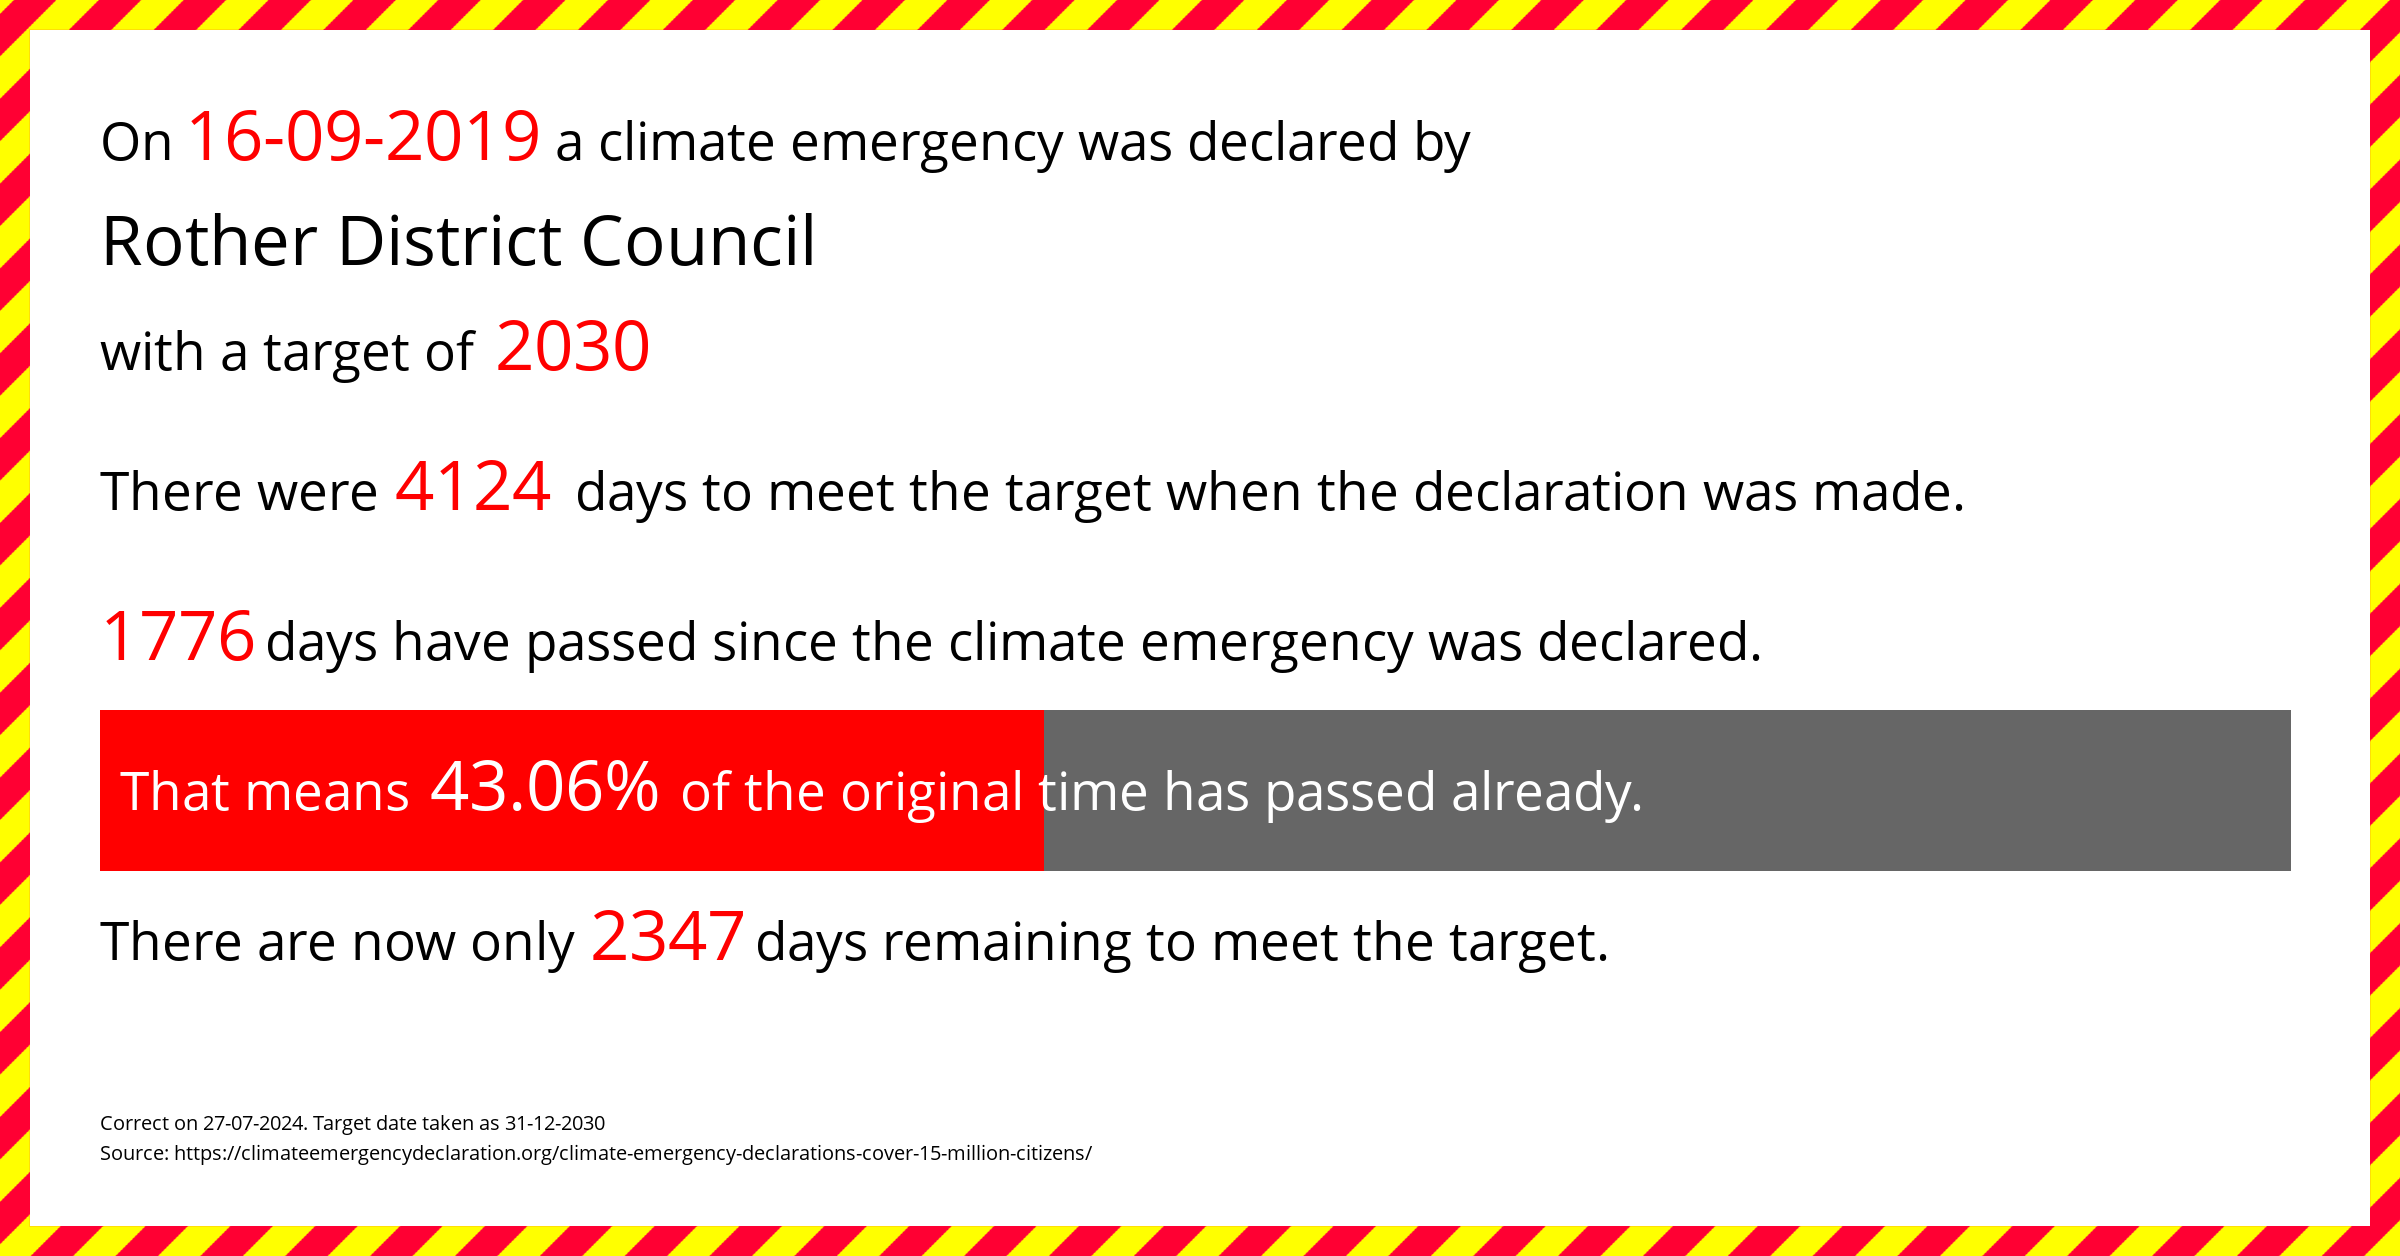 Rother District Council declared a Climate emergency on Monday 16th September 2019, with a target of 2030.